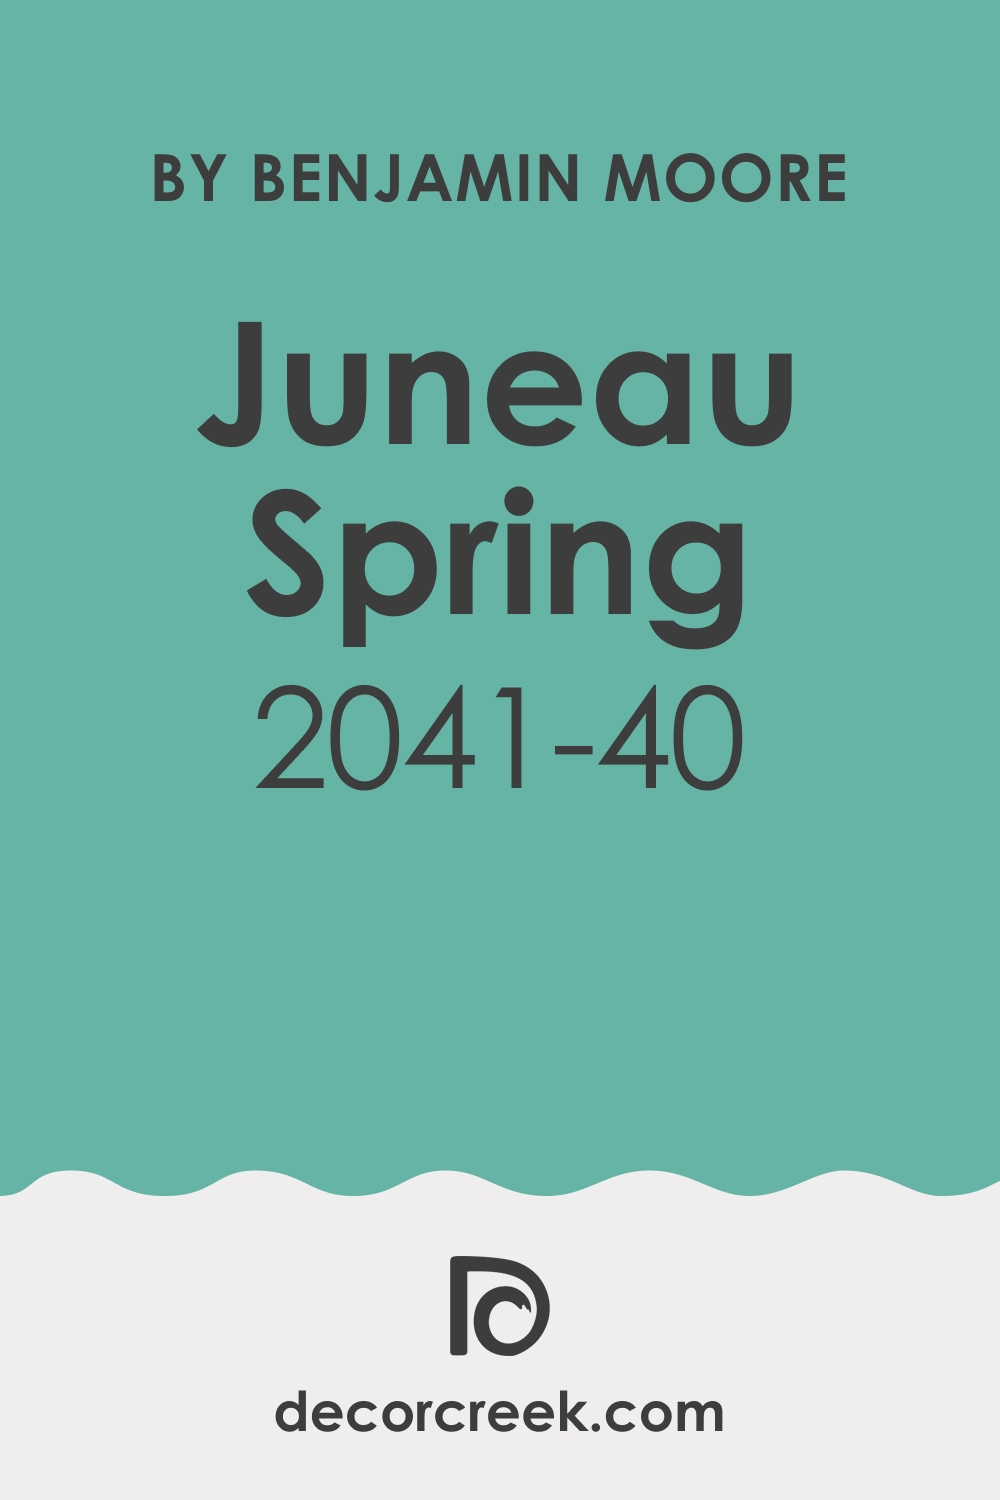 What Color Is Juneau Spring 2041-40?